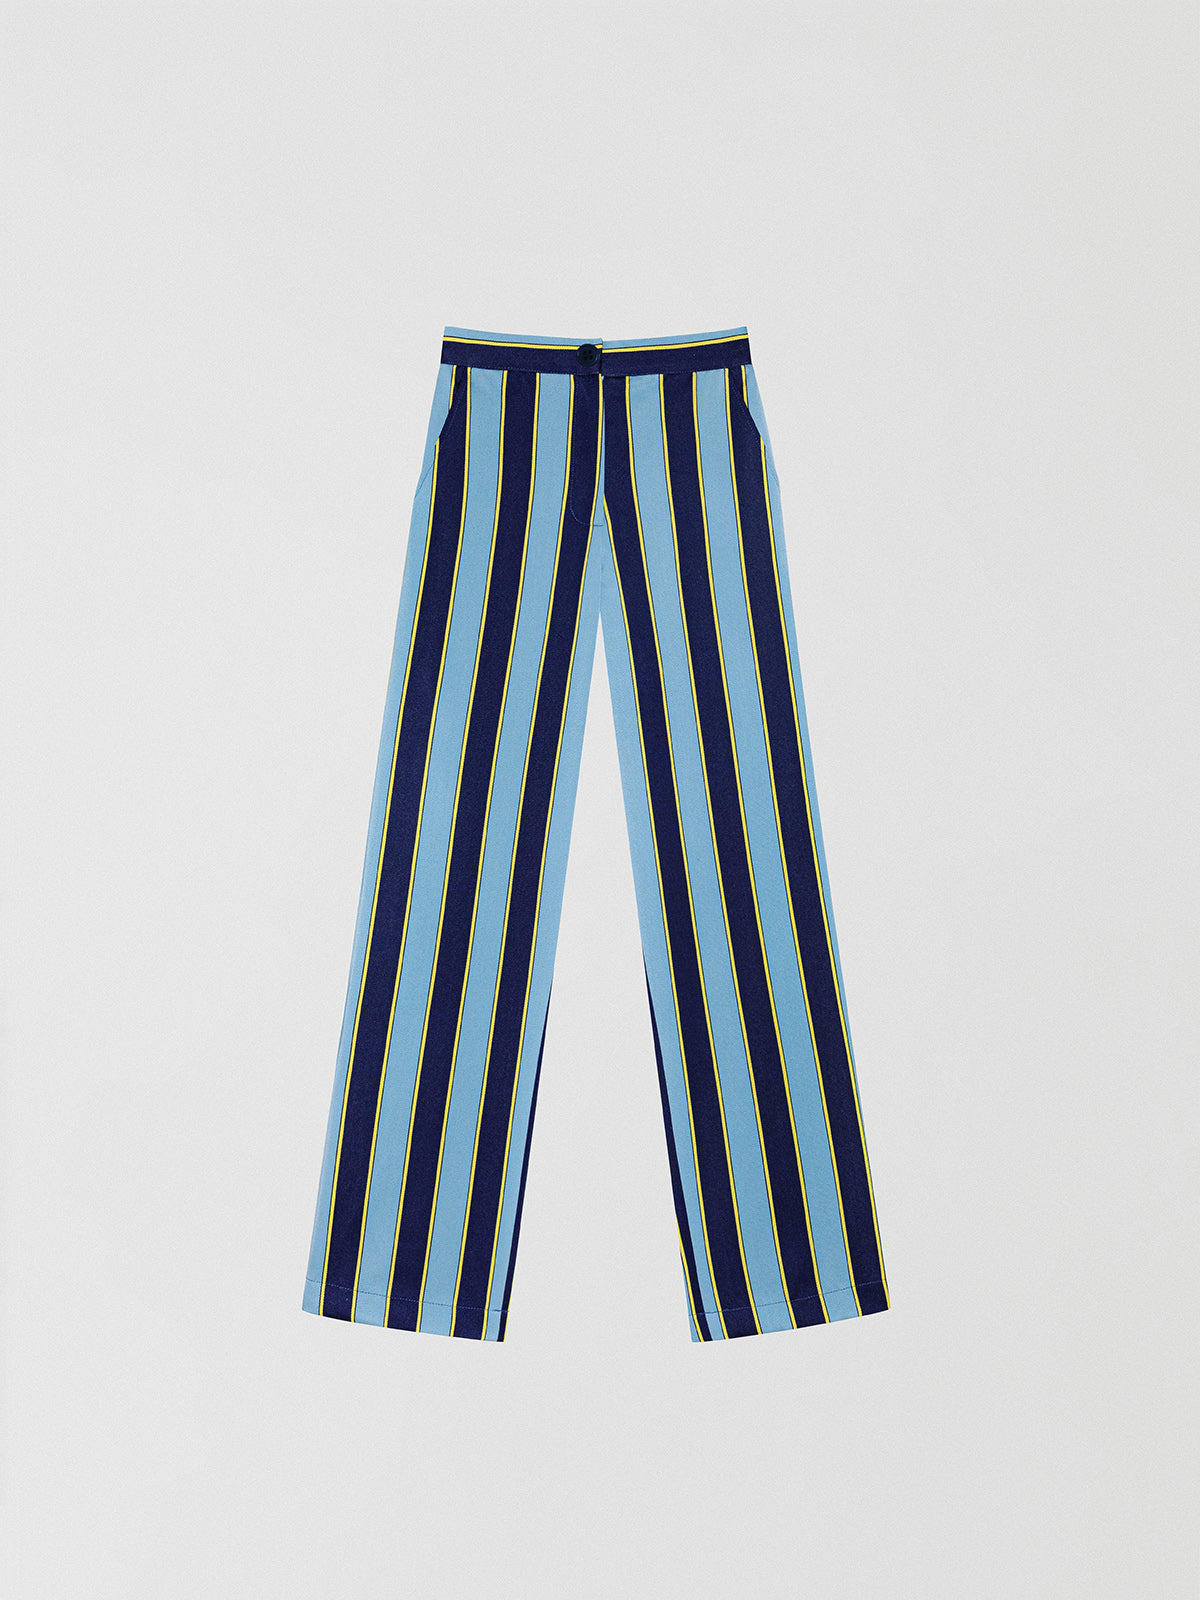 Blue, navy and yellow striped suit trousers.